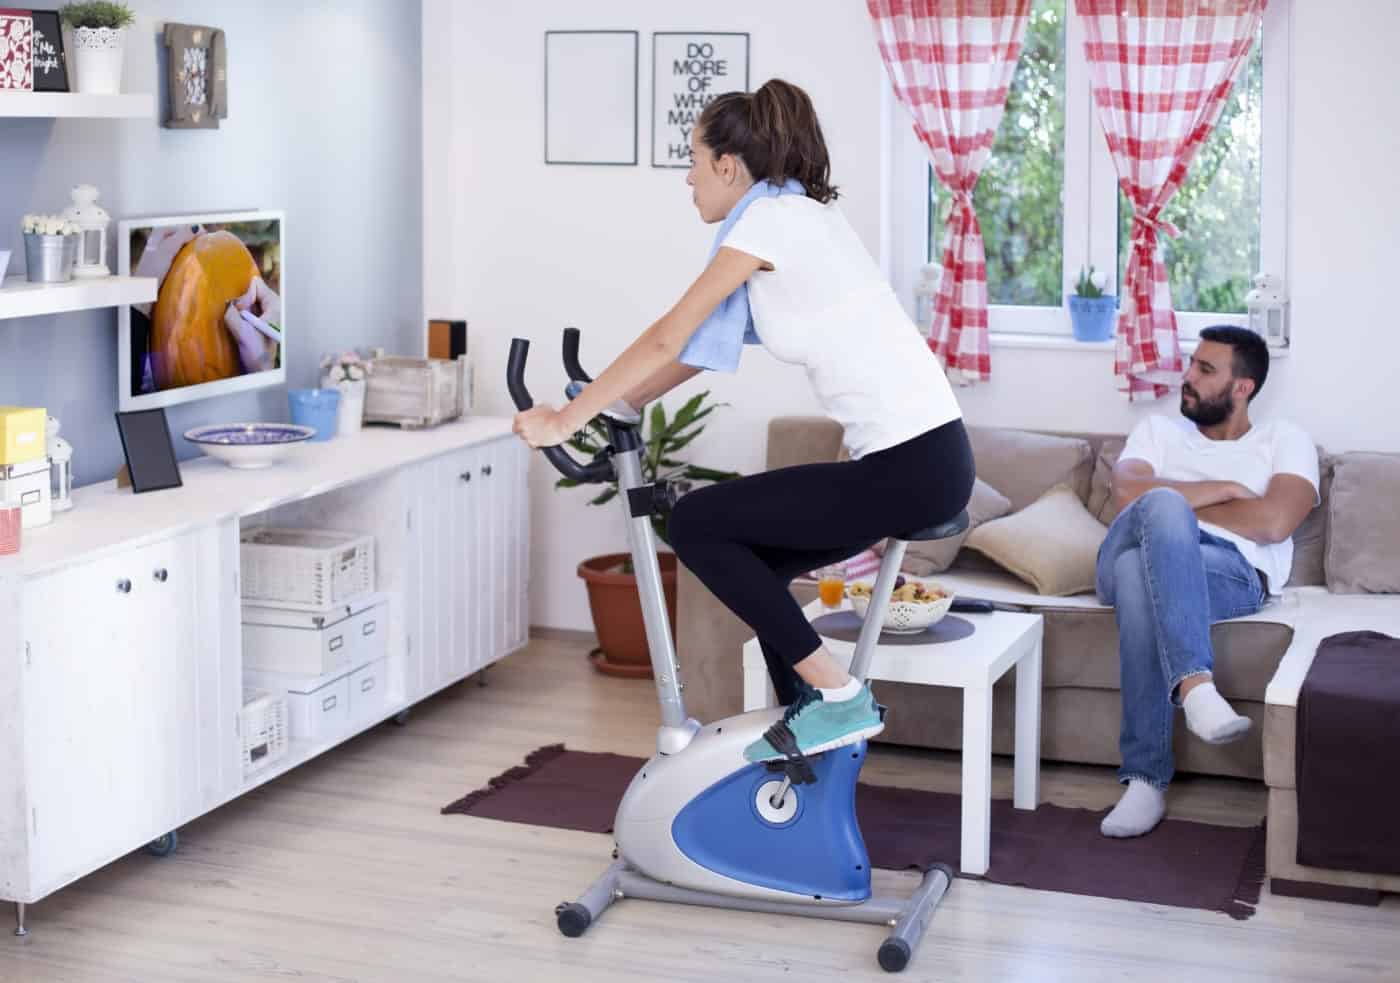 Sporty woman training on exercise bike in the living room